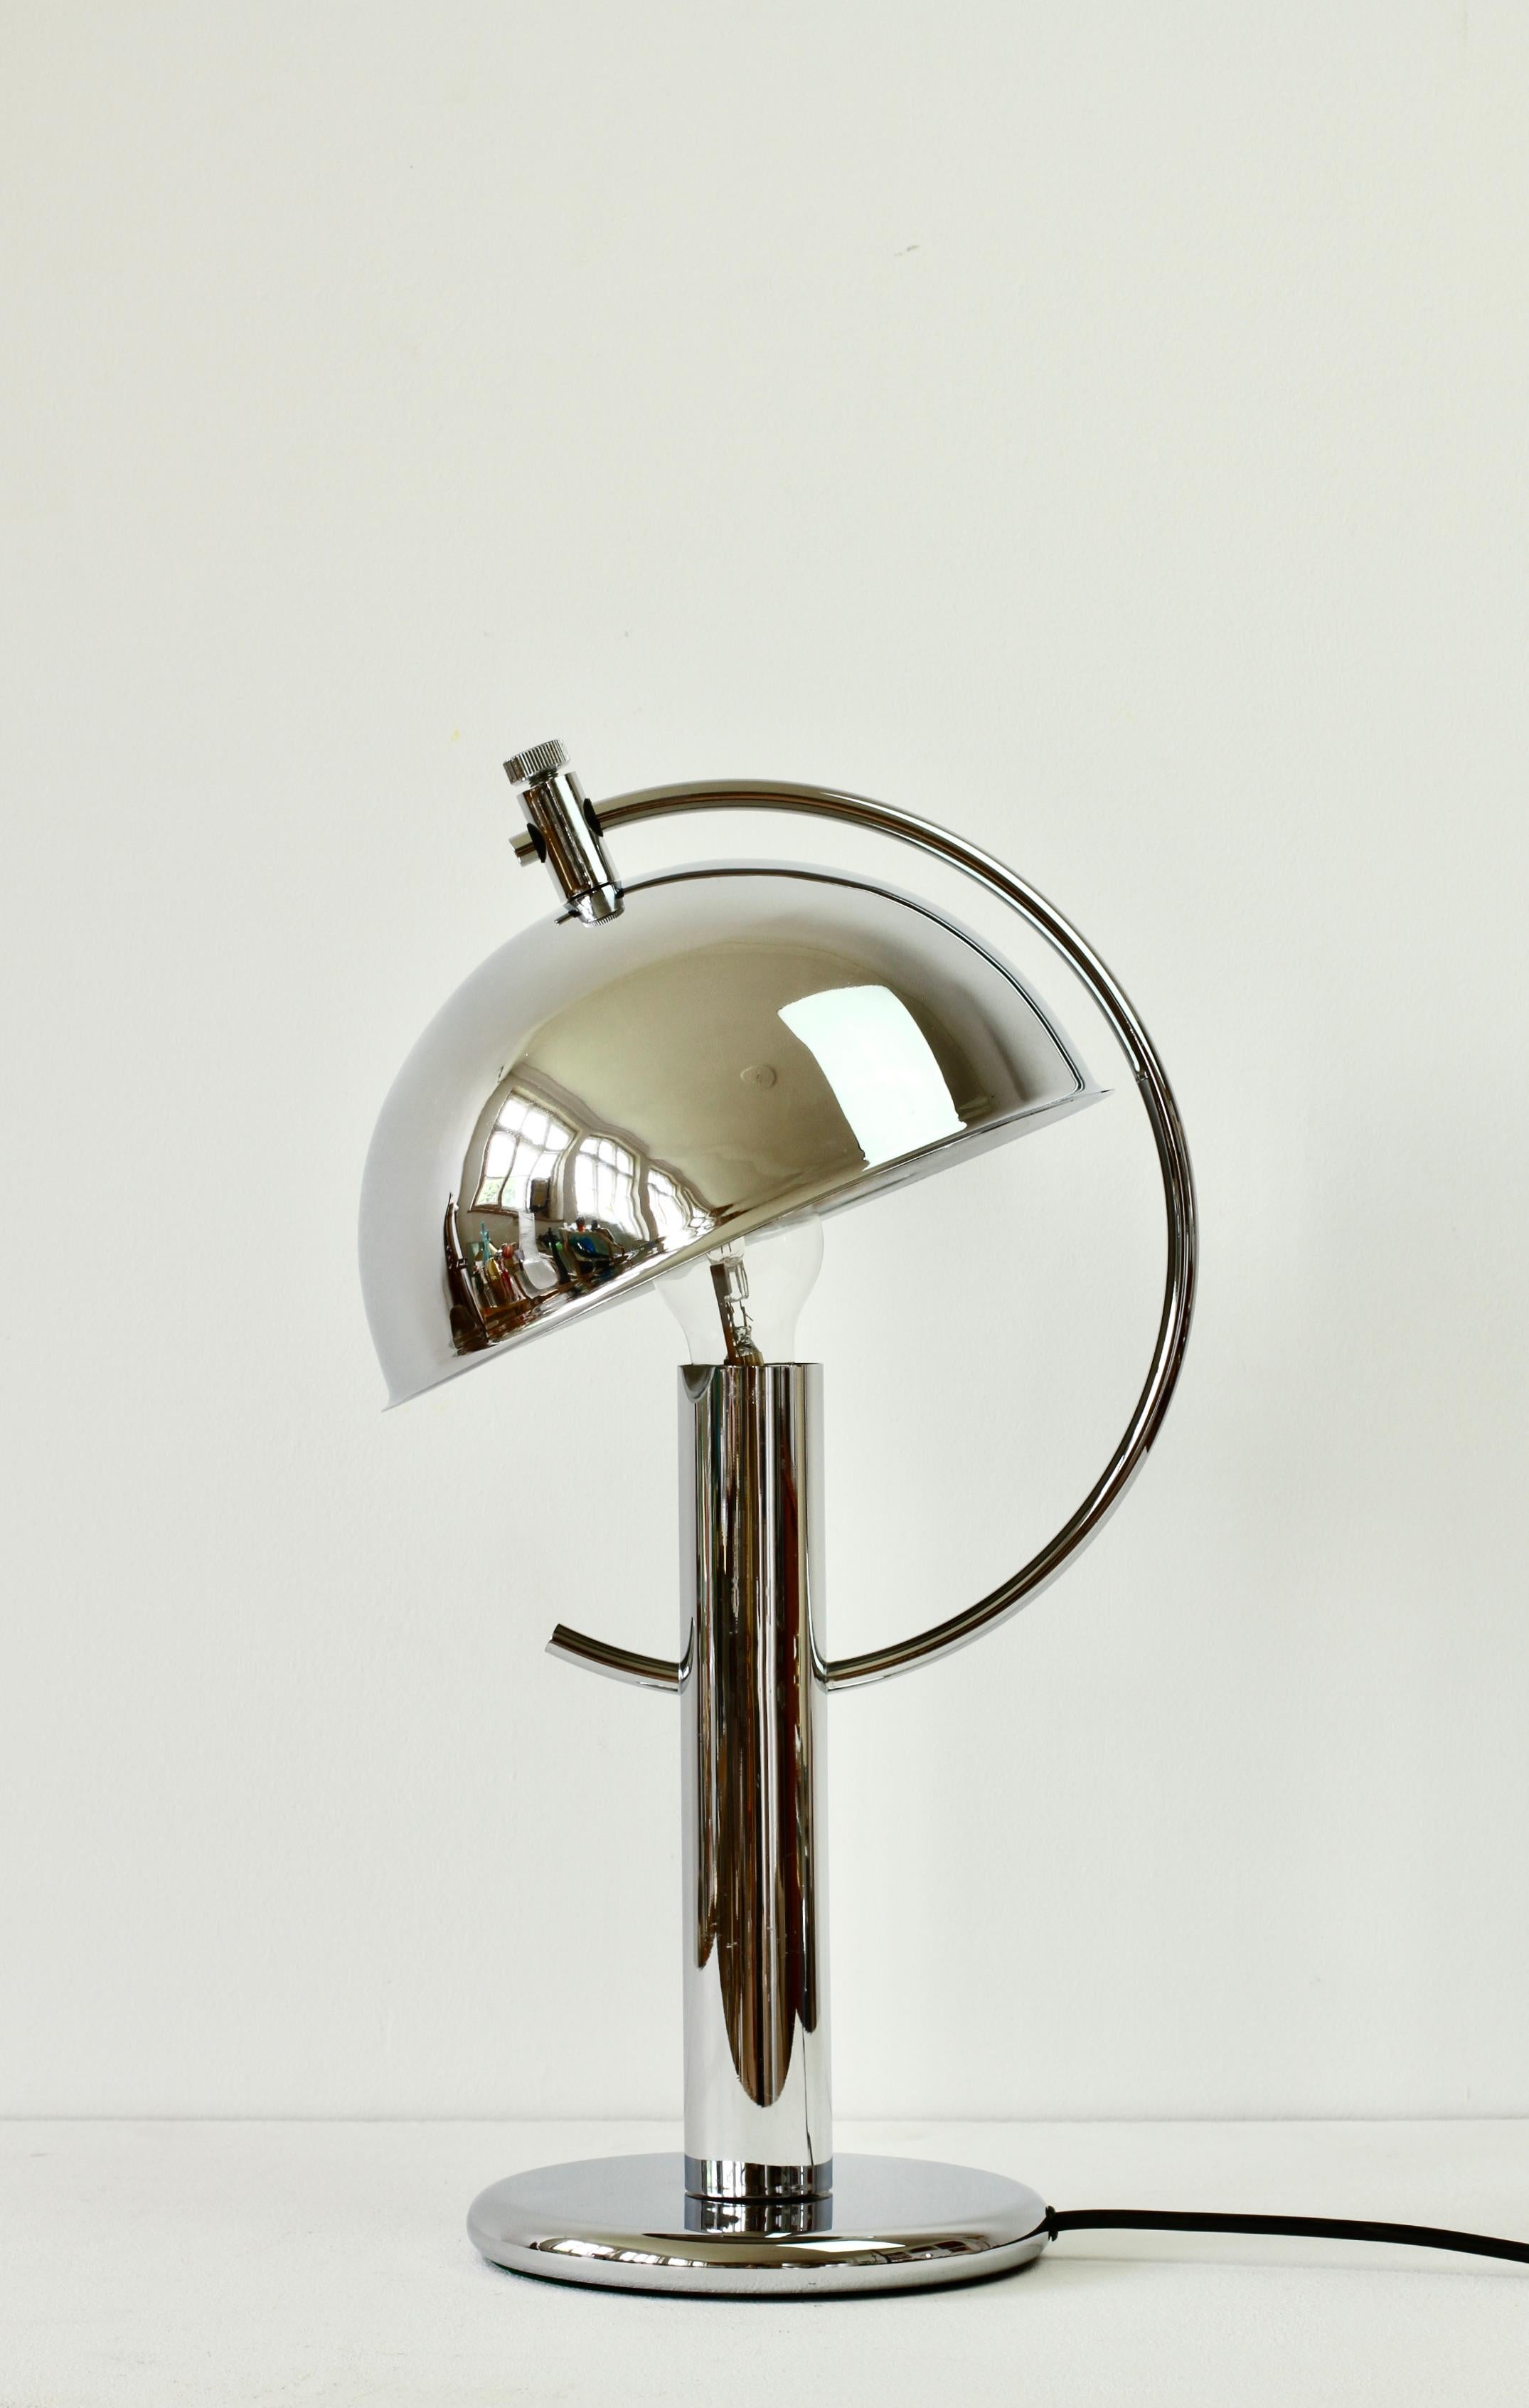 Rare Mid-Century Modern vintage German made table lamp or desk light by Florian Schulz circa 1980s. Featuring polished chrome plated hardware (now with age related patina) and an adjustable round shade making this the perfect modernist style reading